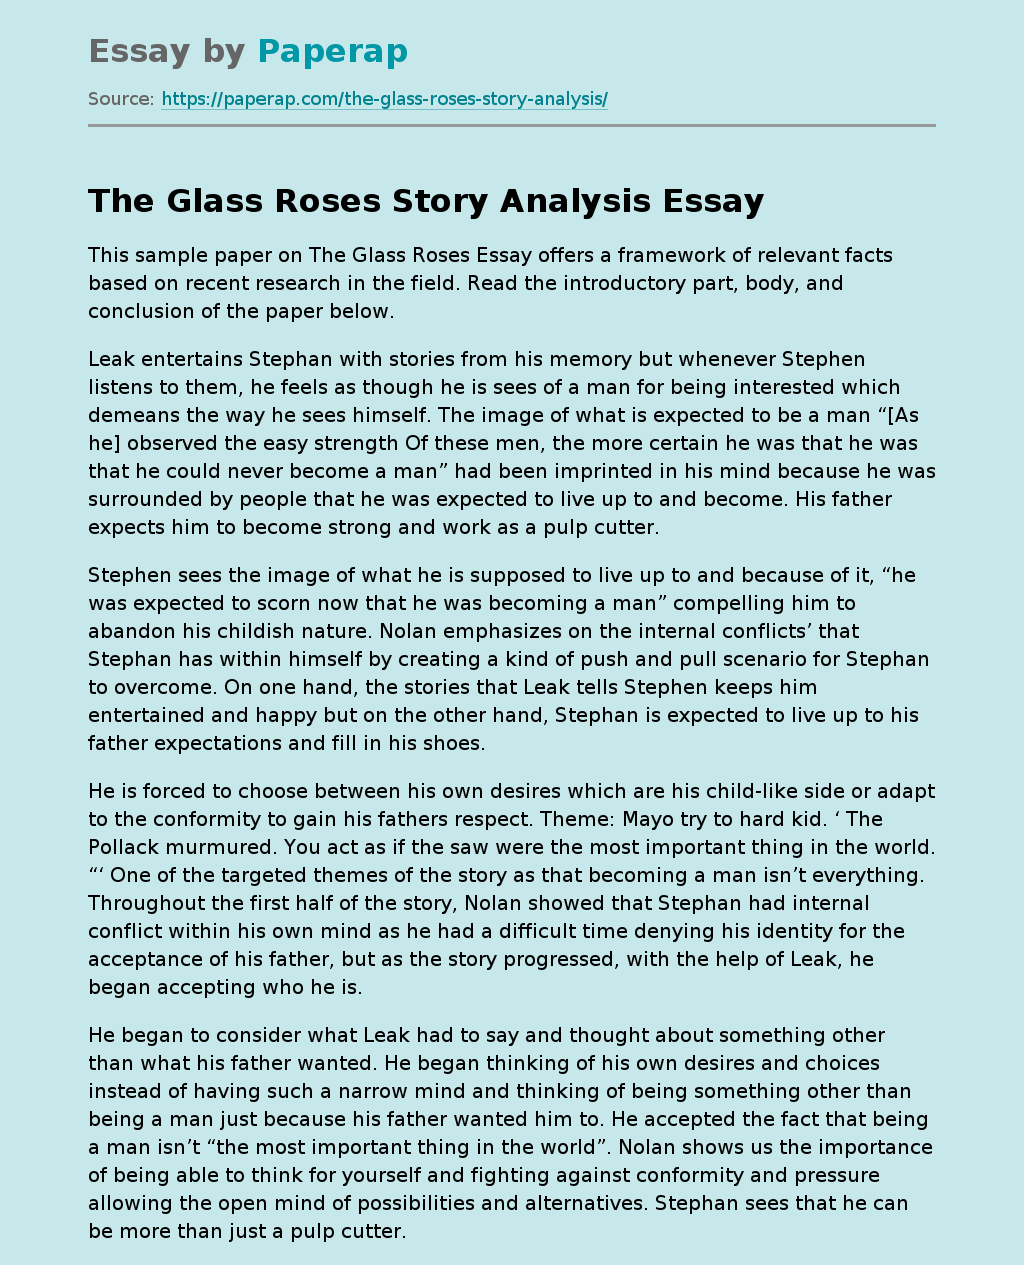 The Glass Roses Story Analysis